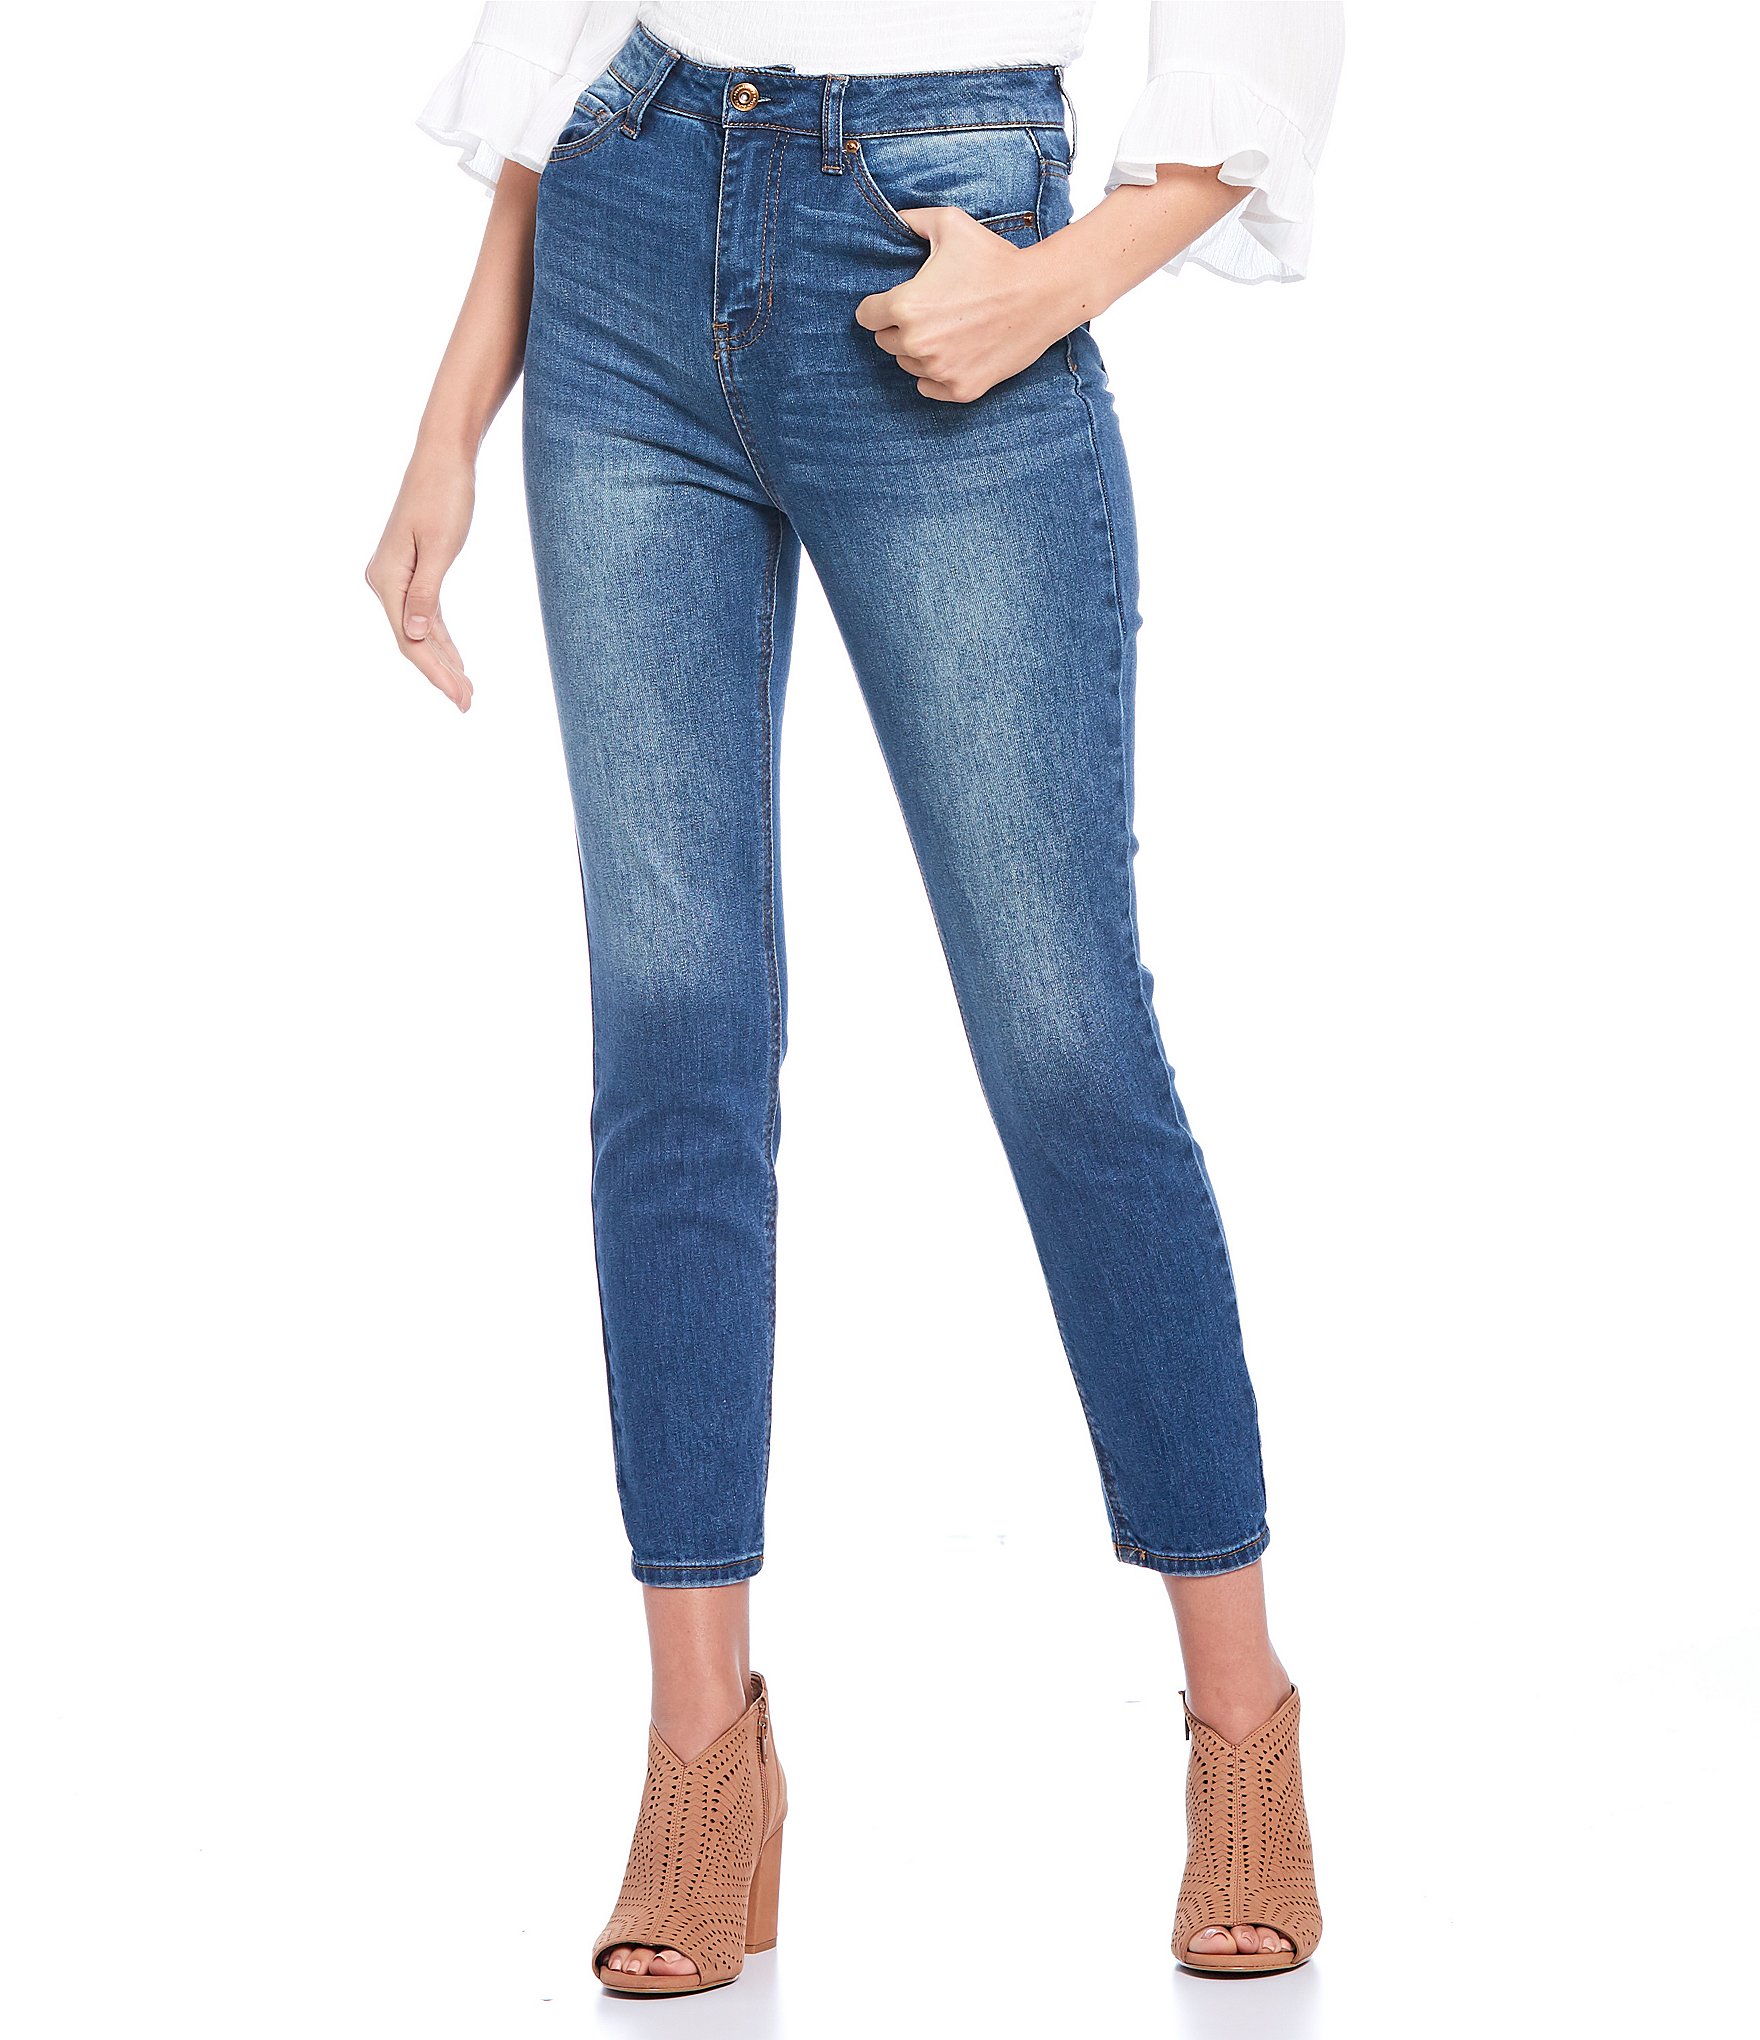 Hippie Laundry Throwback Destructed High Rise Skinny Jeans